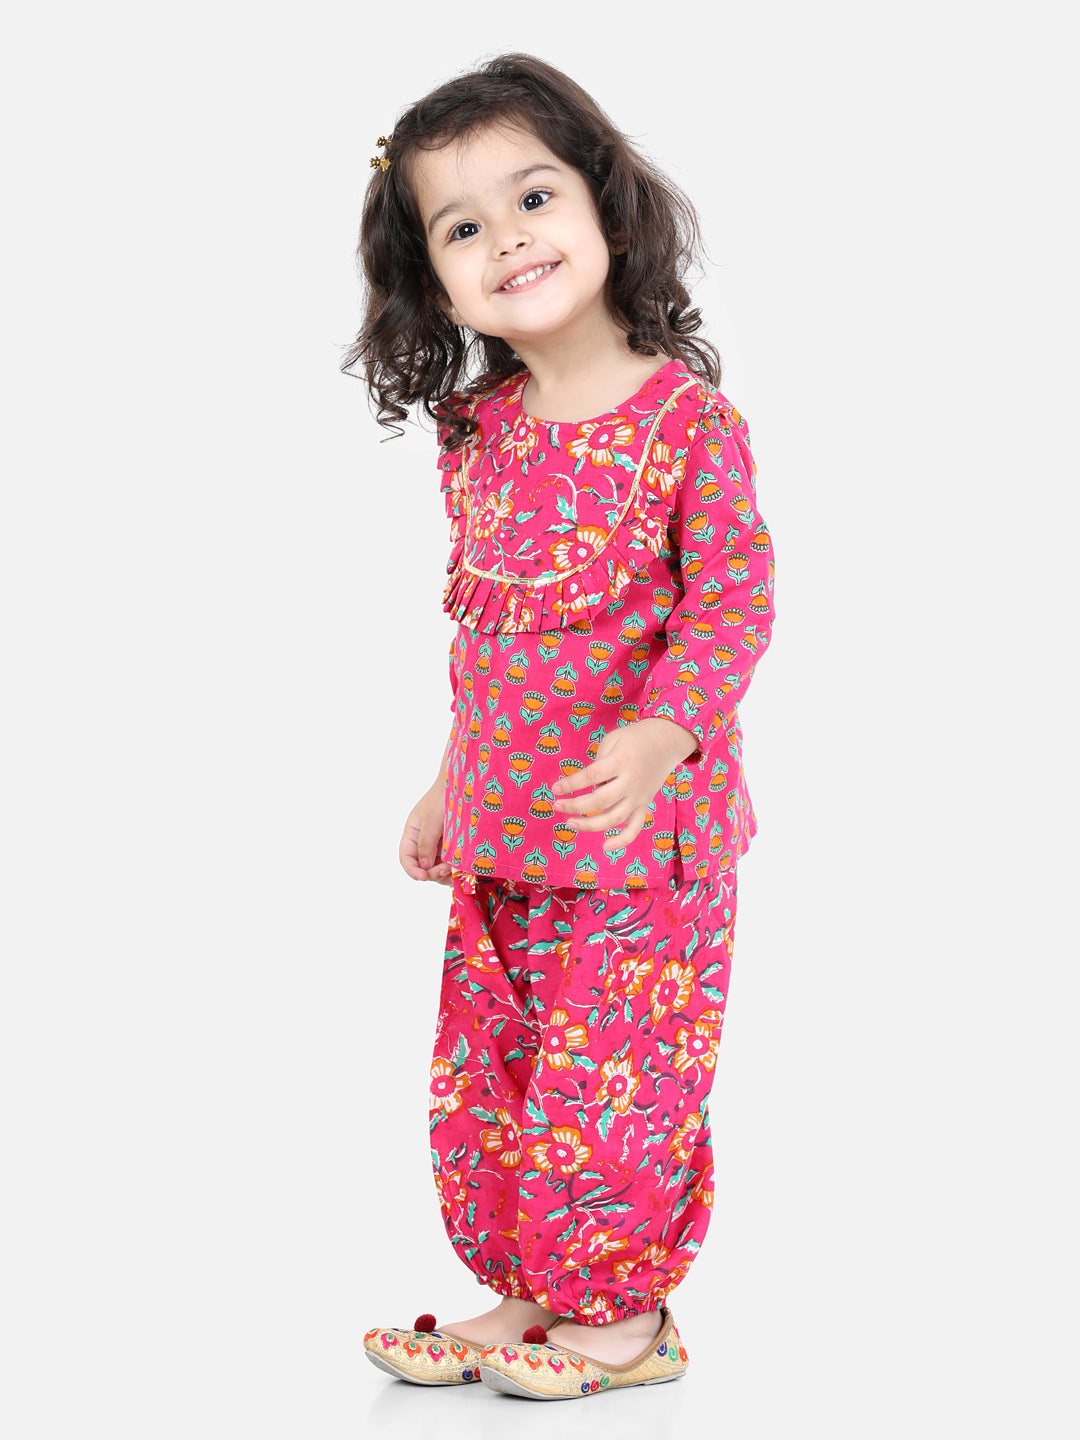 Girls Pure Cotton Printed Top Harem pant Indo Western Clothing Set - Pink NOZ2TOZ - Made In INDIA.